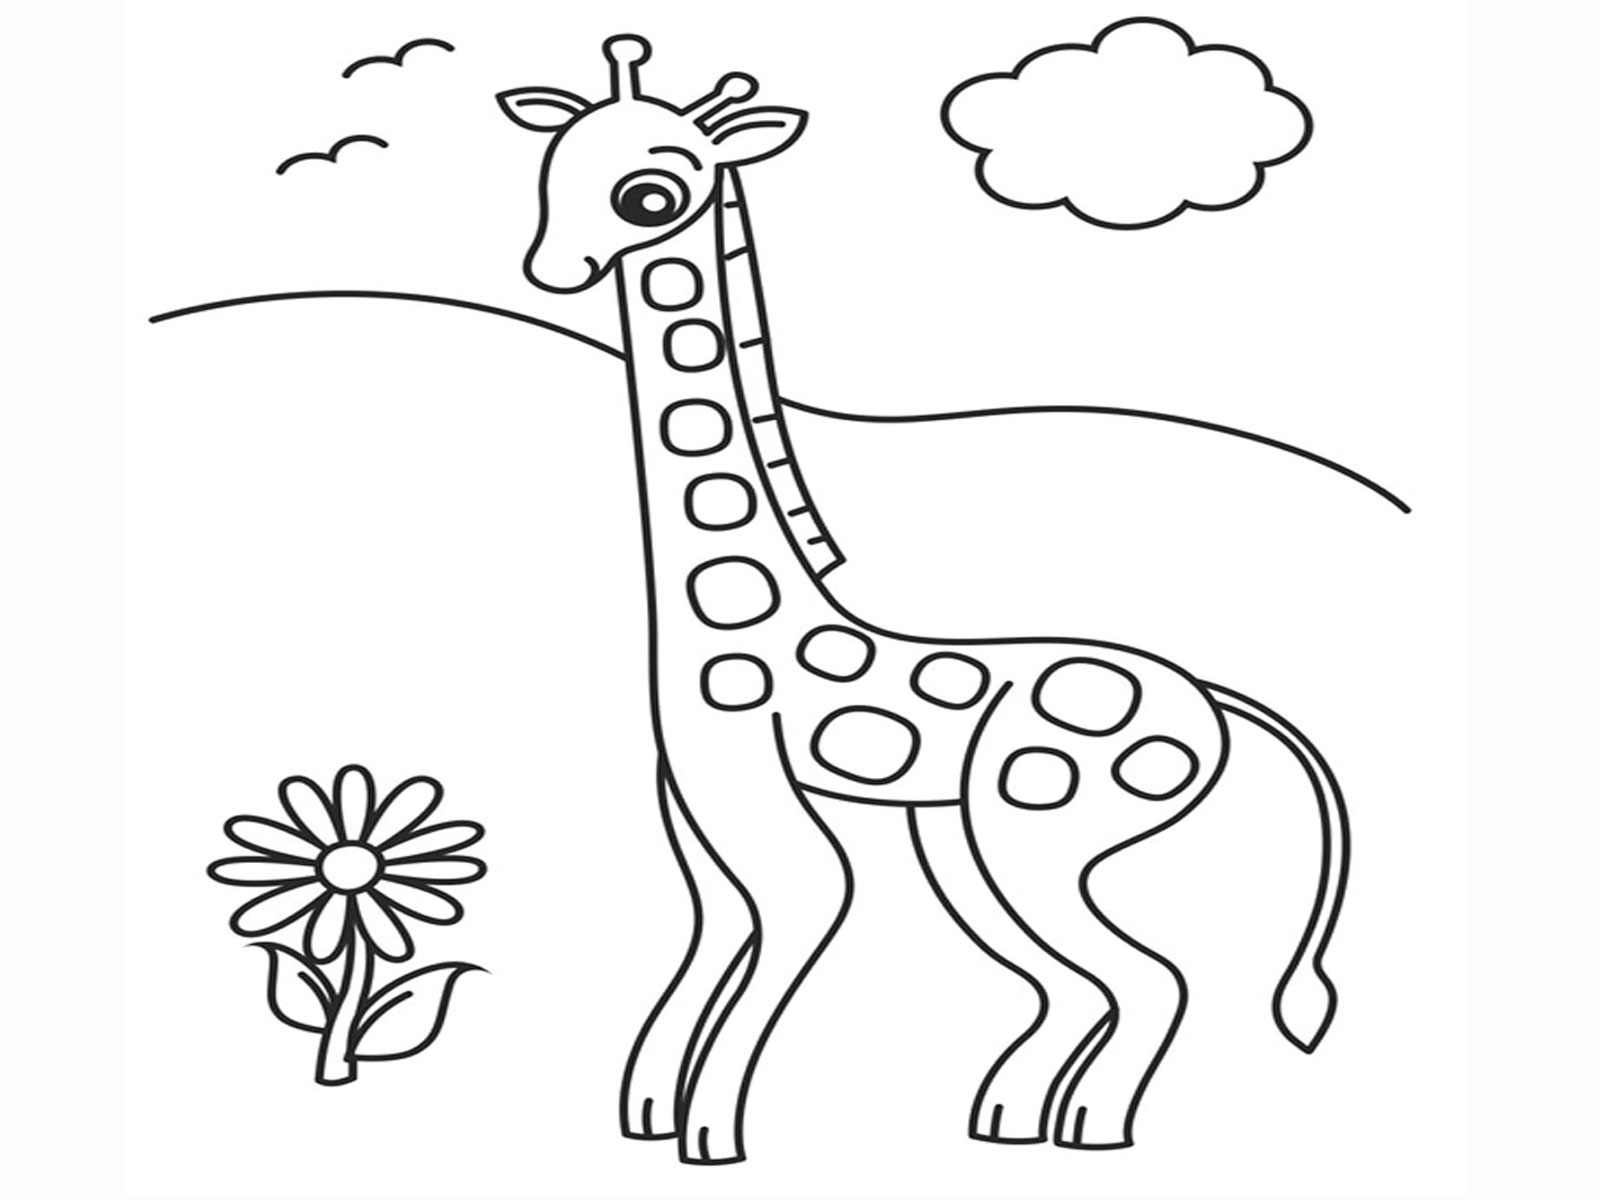 Download Giraffe Descprition And Facts